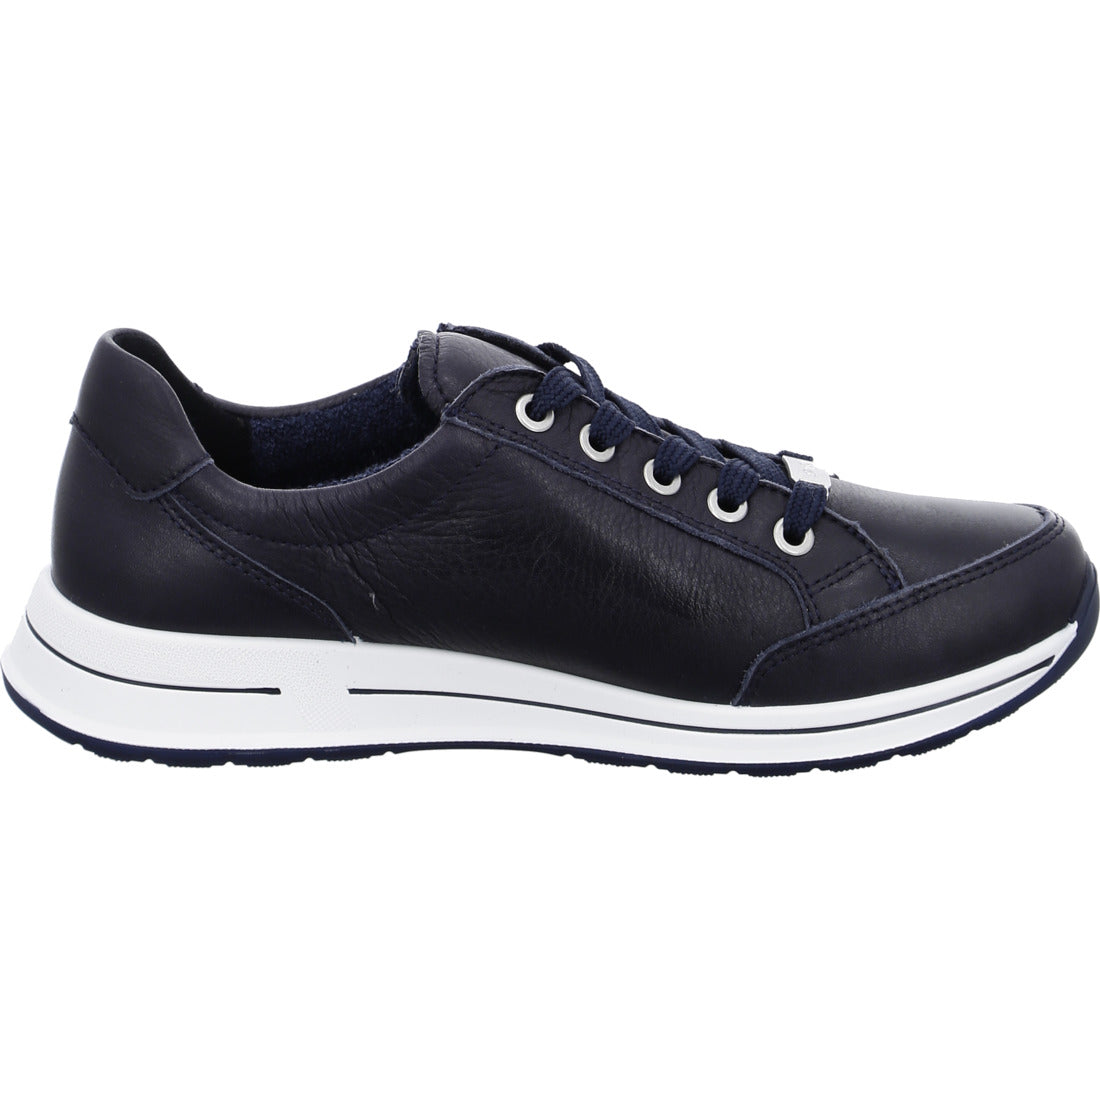 Ara 12-24801 02 Navy Blue H Fit Trainers with Zip